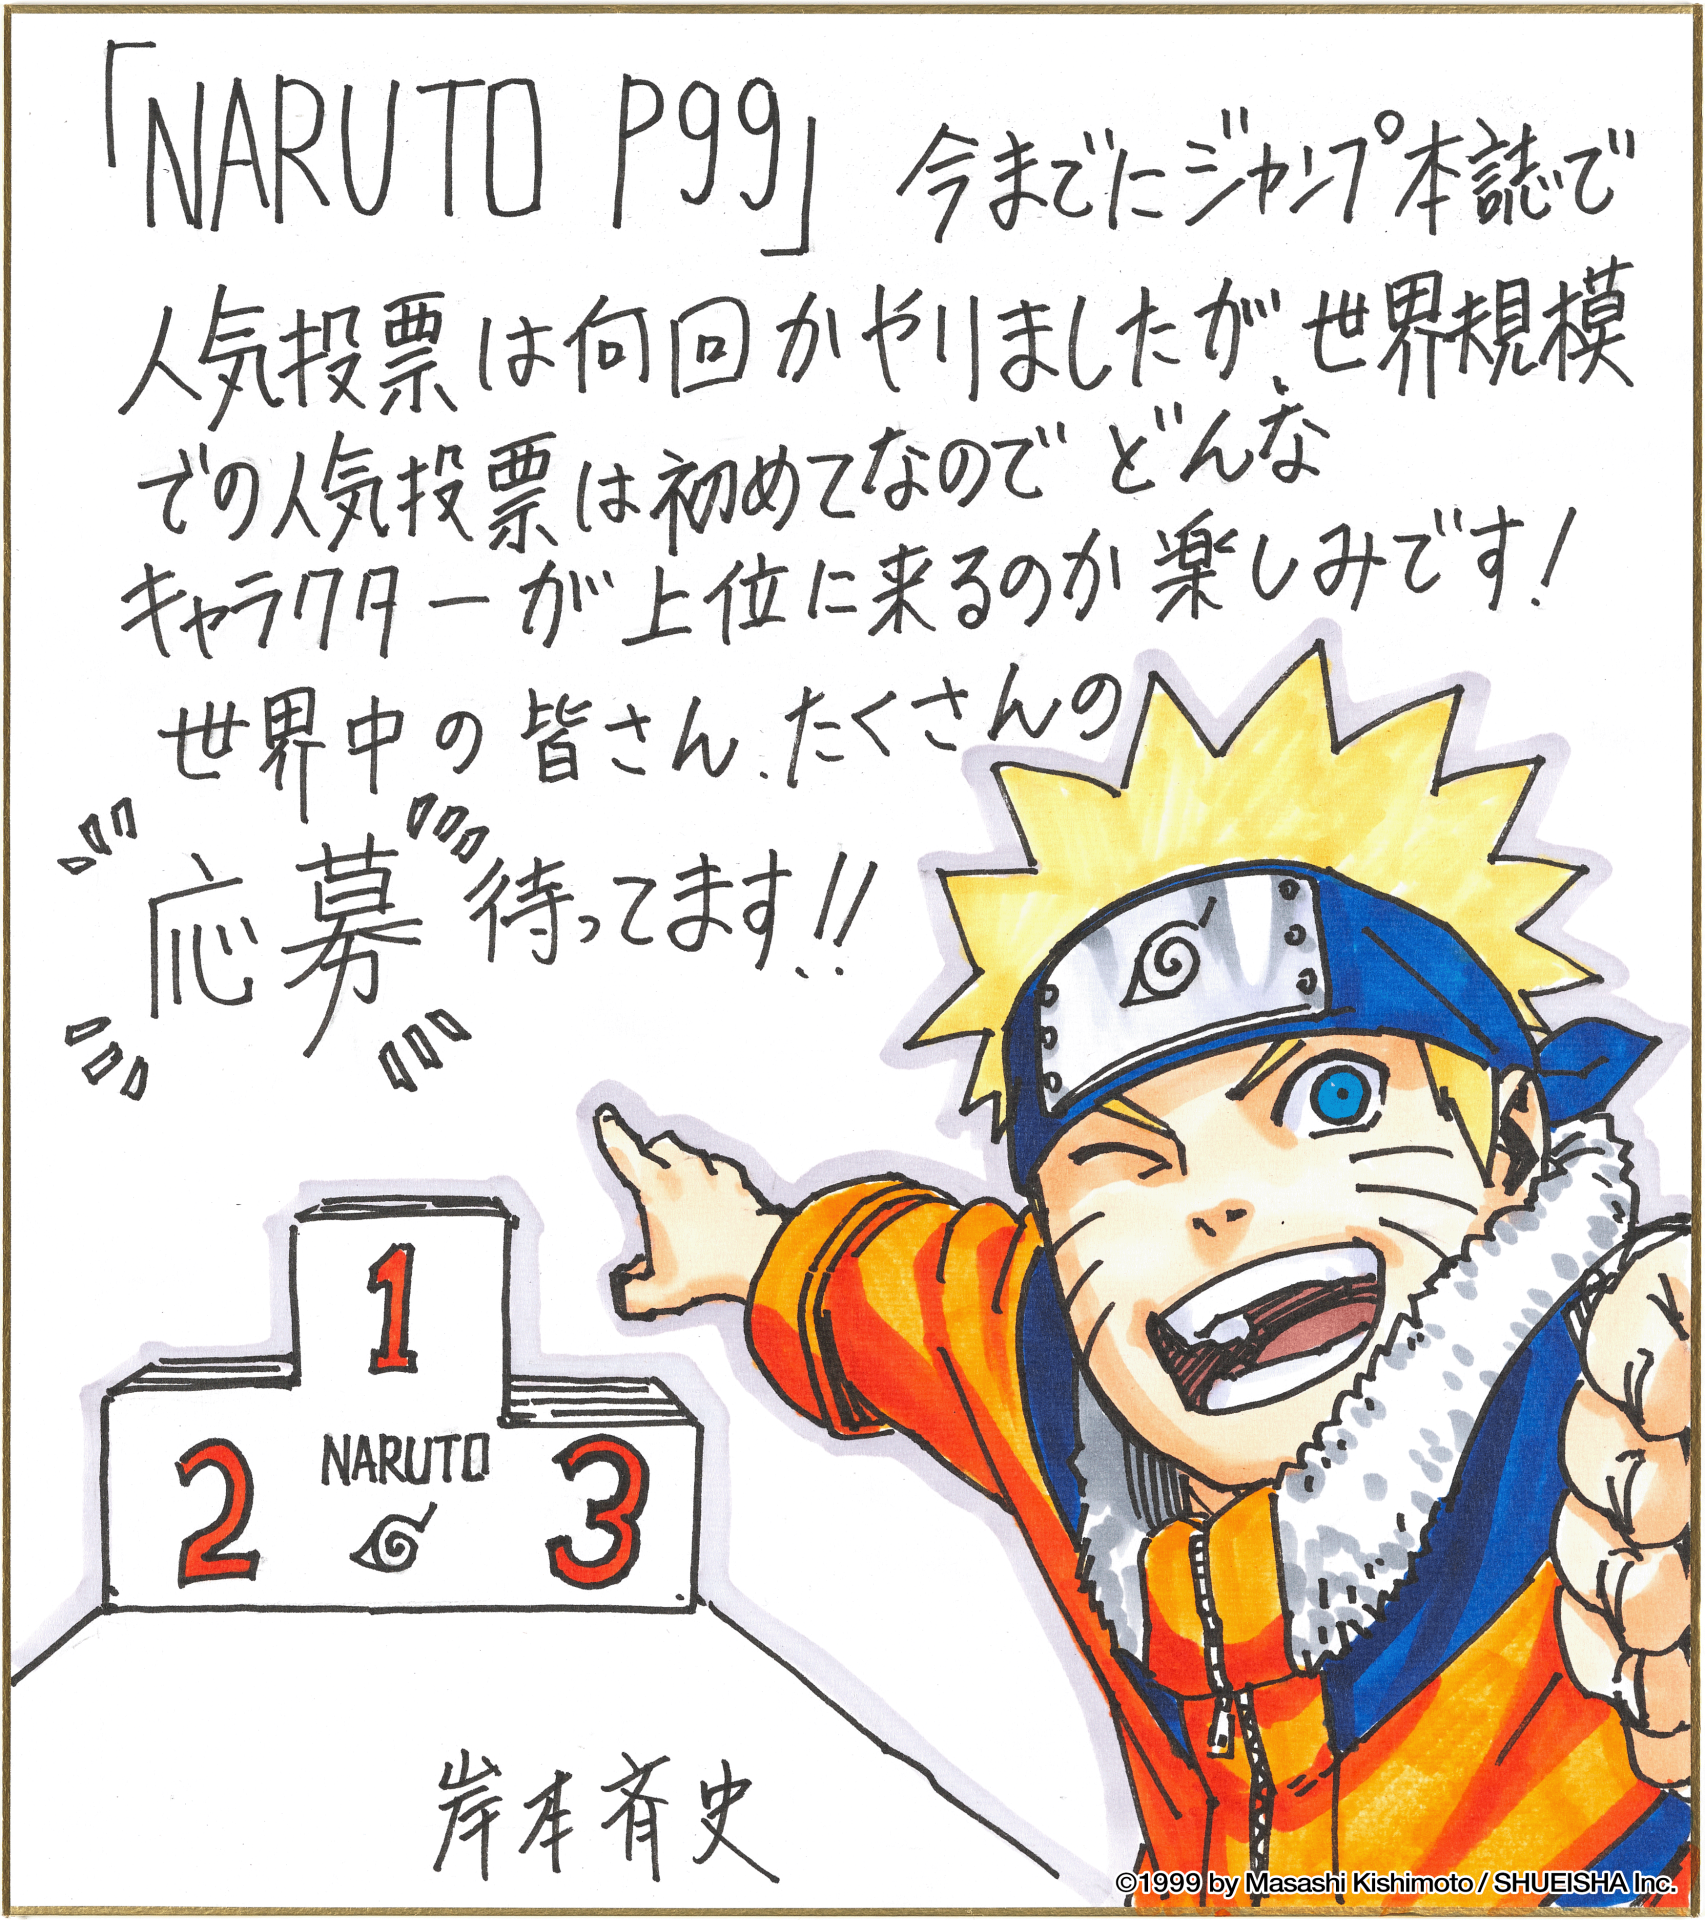 New Naruto anime likely to be announced at Jump Festa 2023